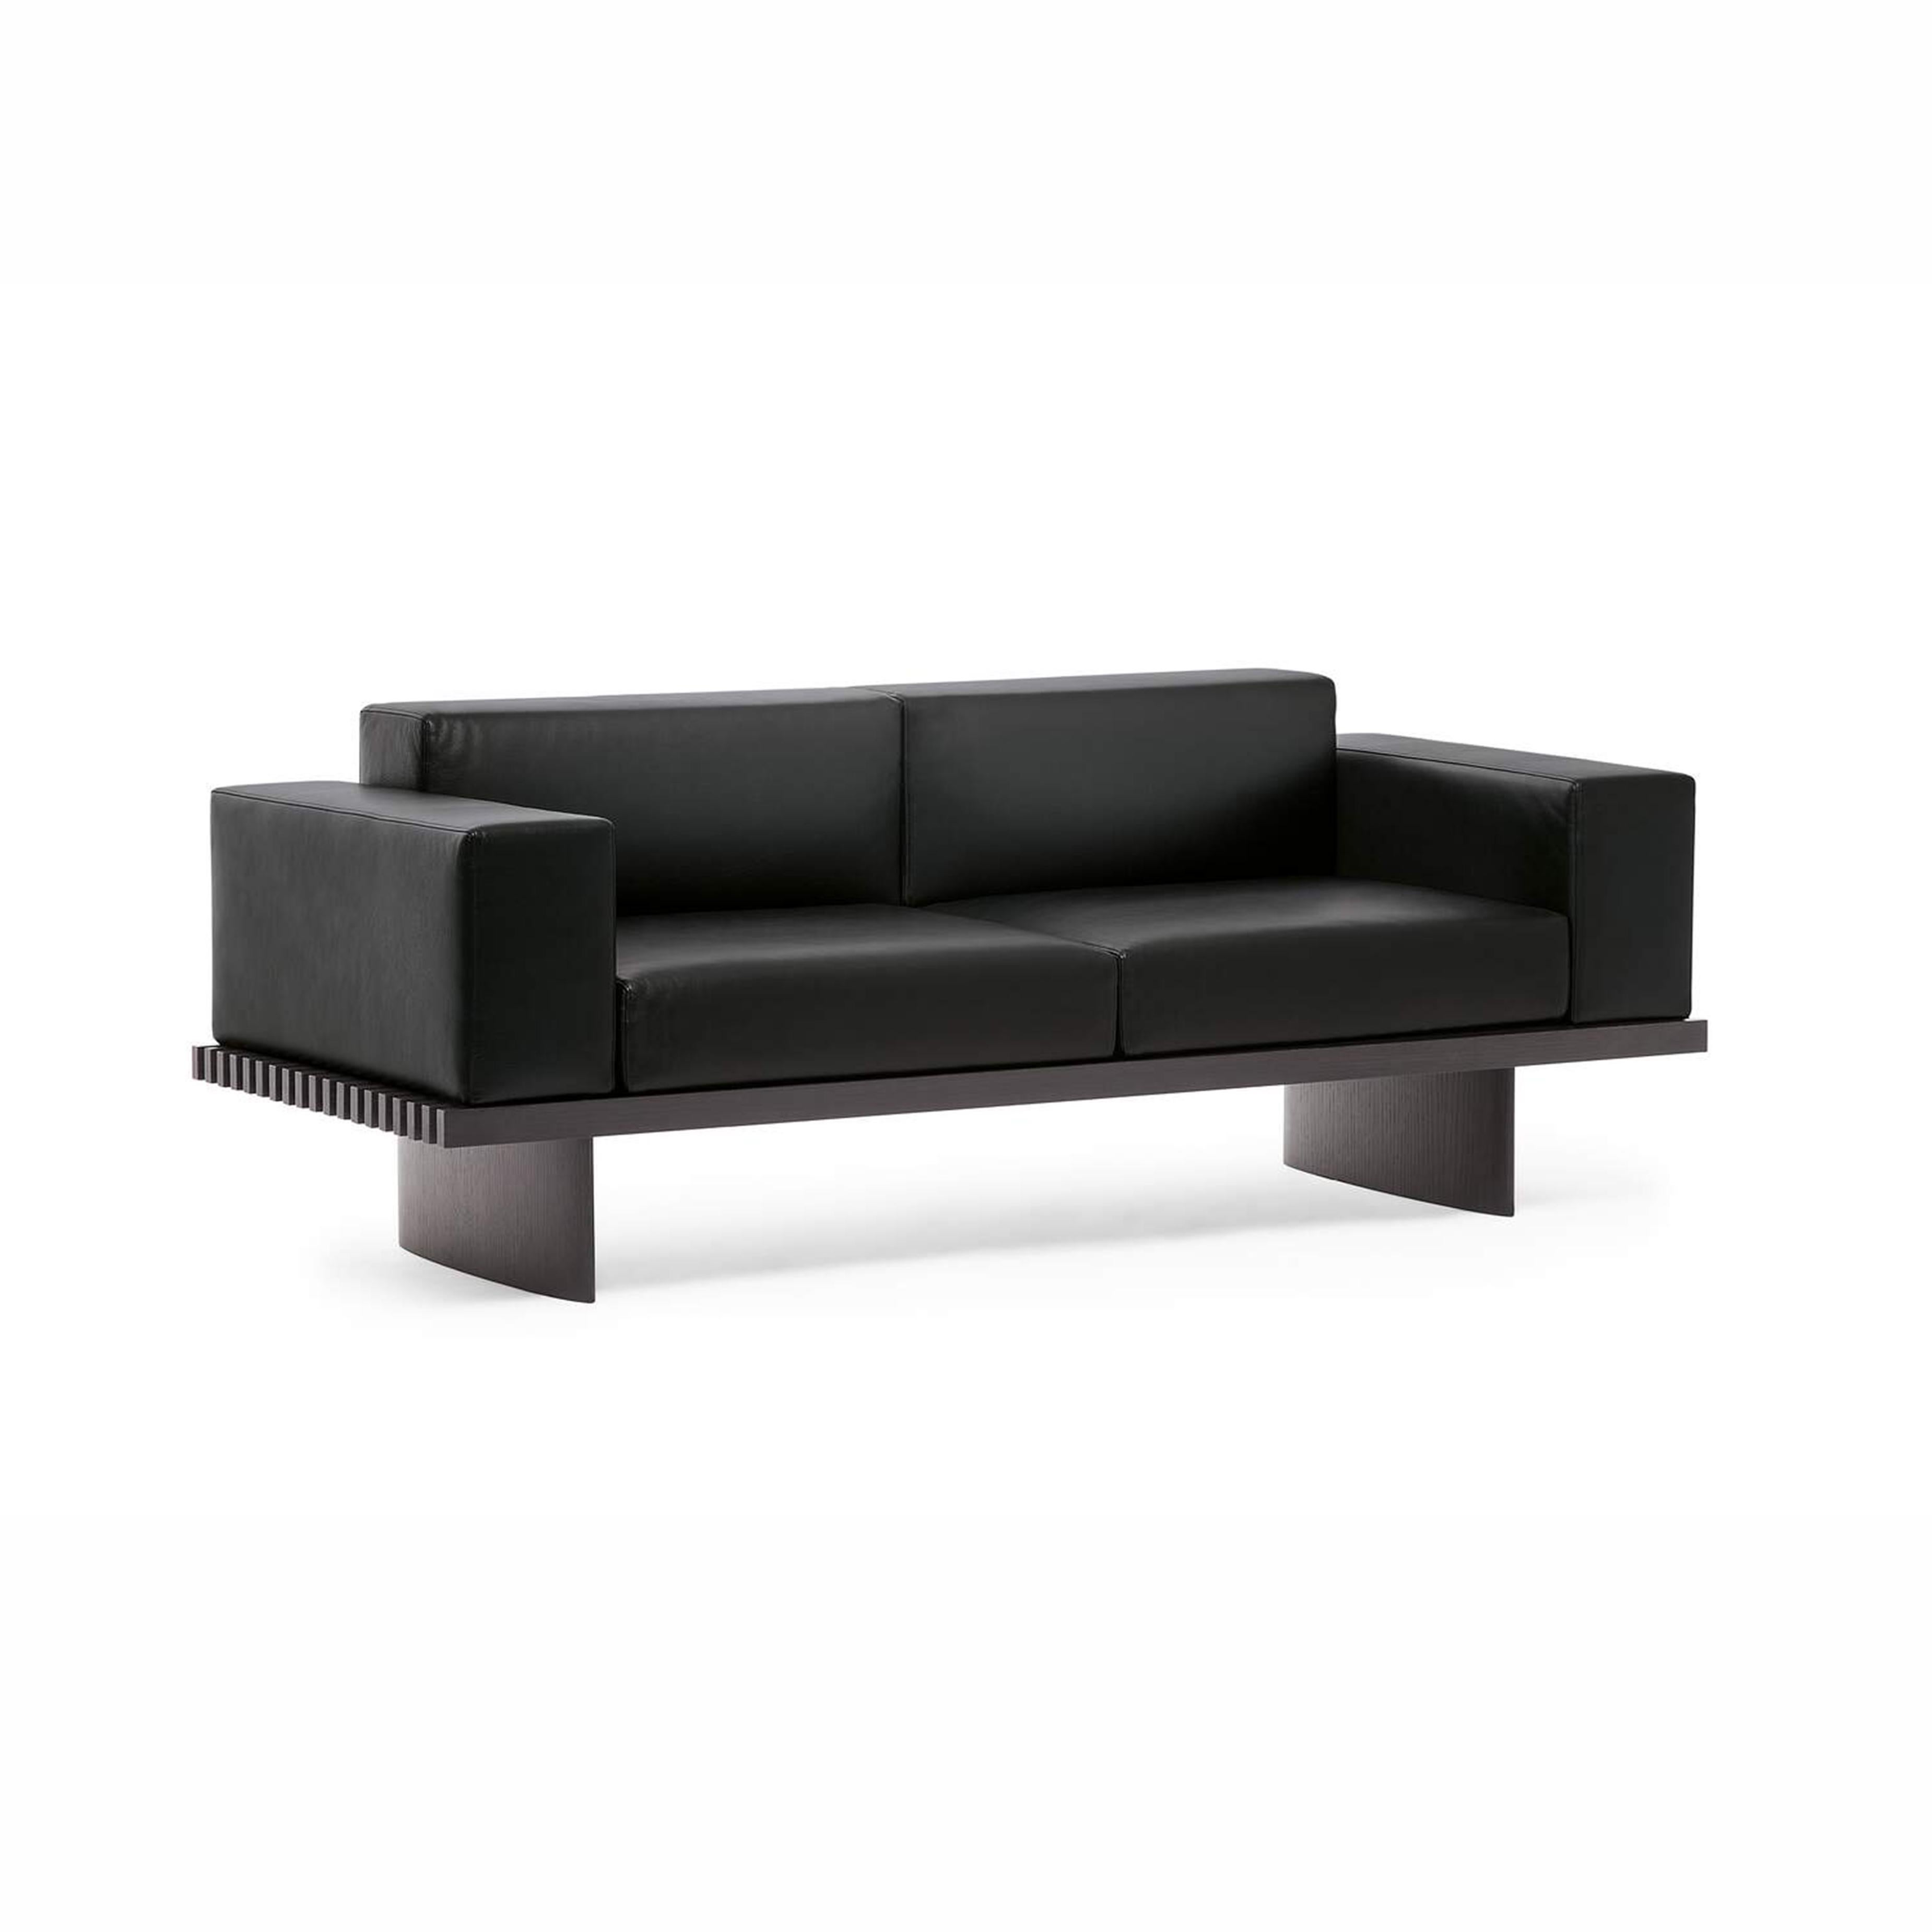 Mid-Century Modern Charlotte Perriand Refolo Modular Sofa, Wood and Black Leather by Cassina For Sale